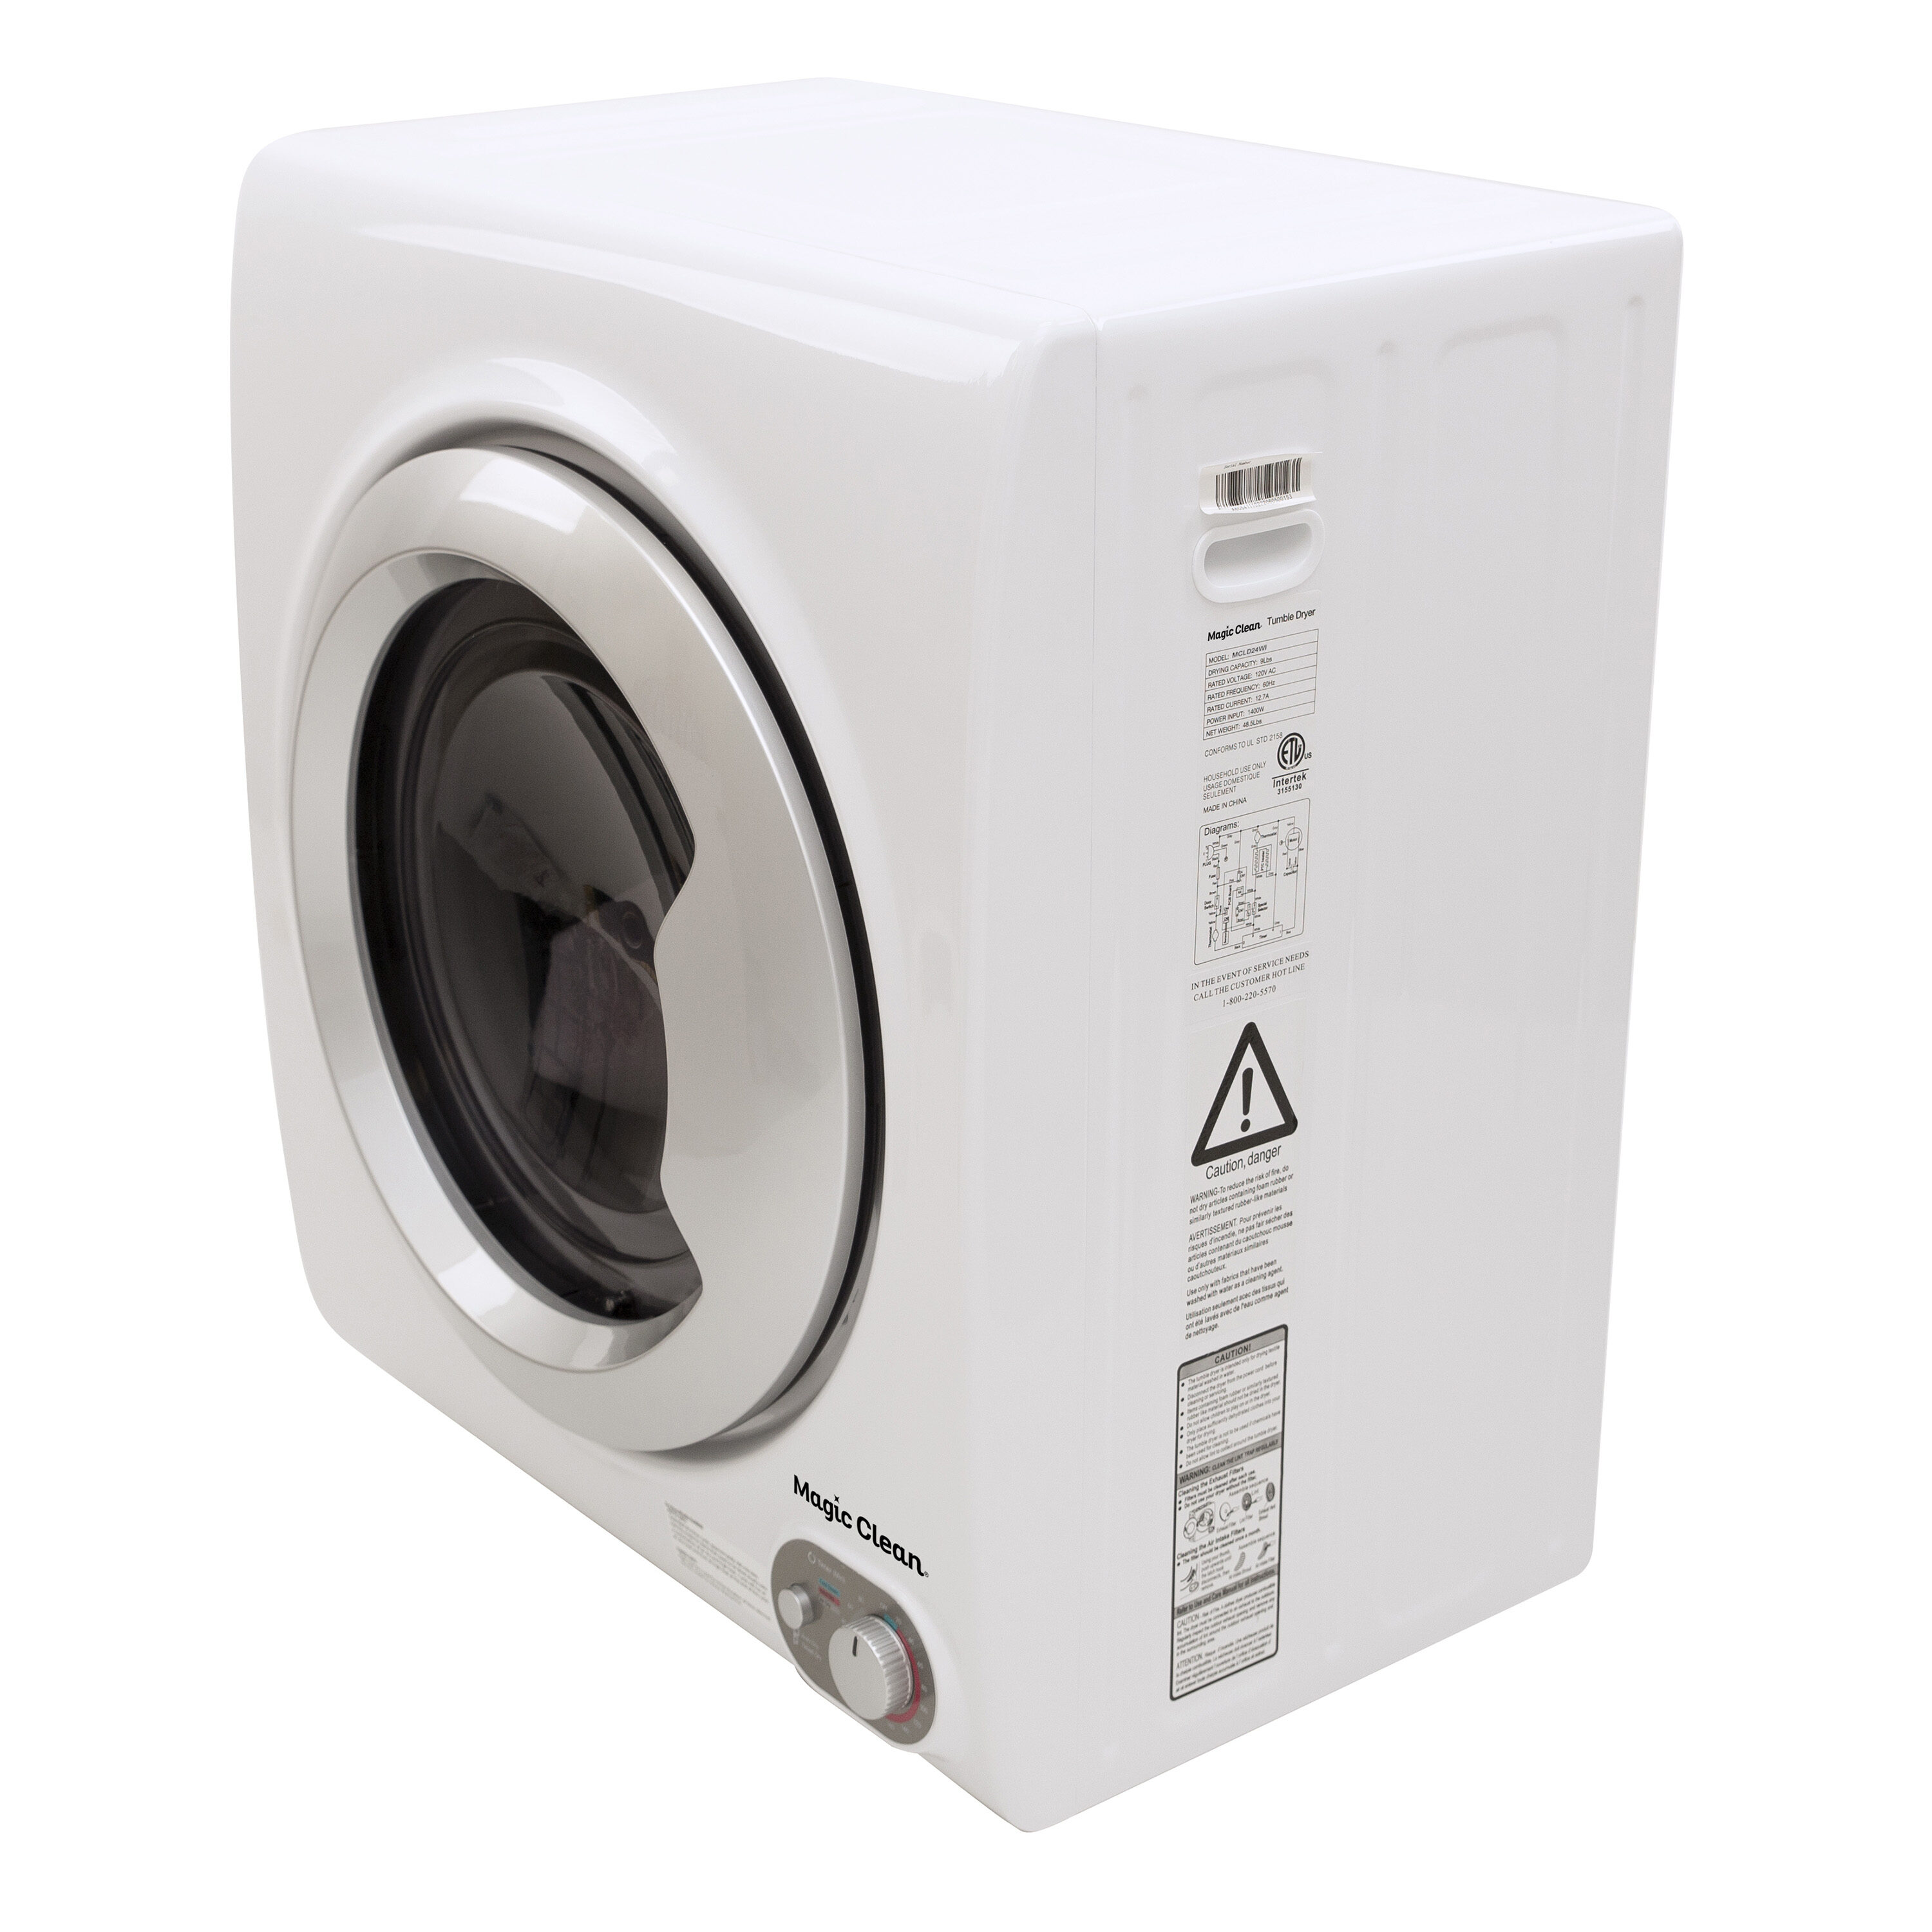 Avanti 2.6-cu ft Portable Electric Dryer (White) in the Electric